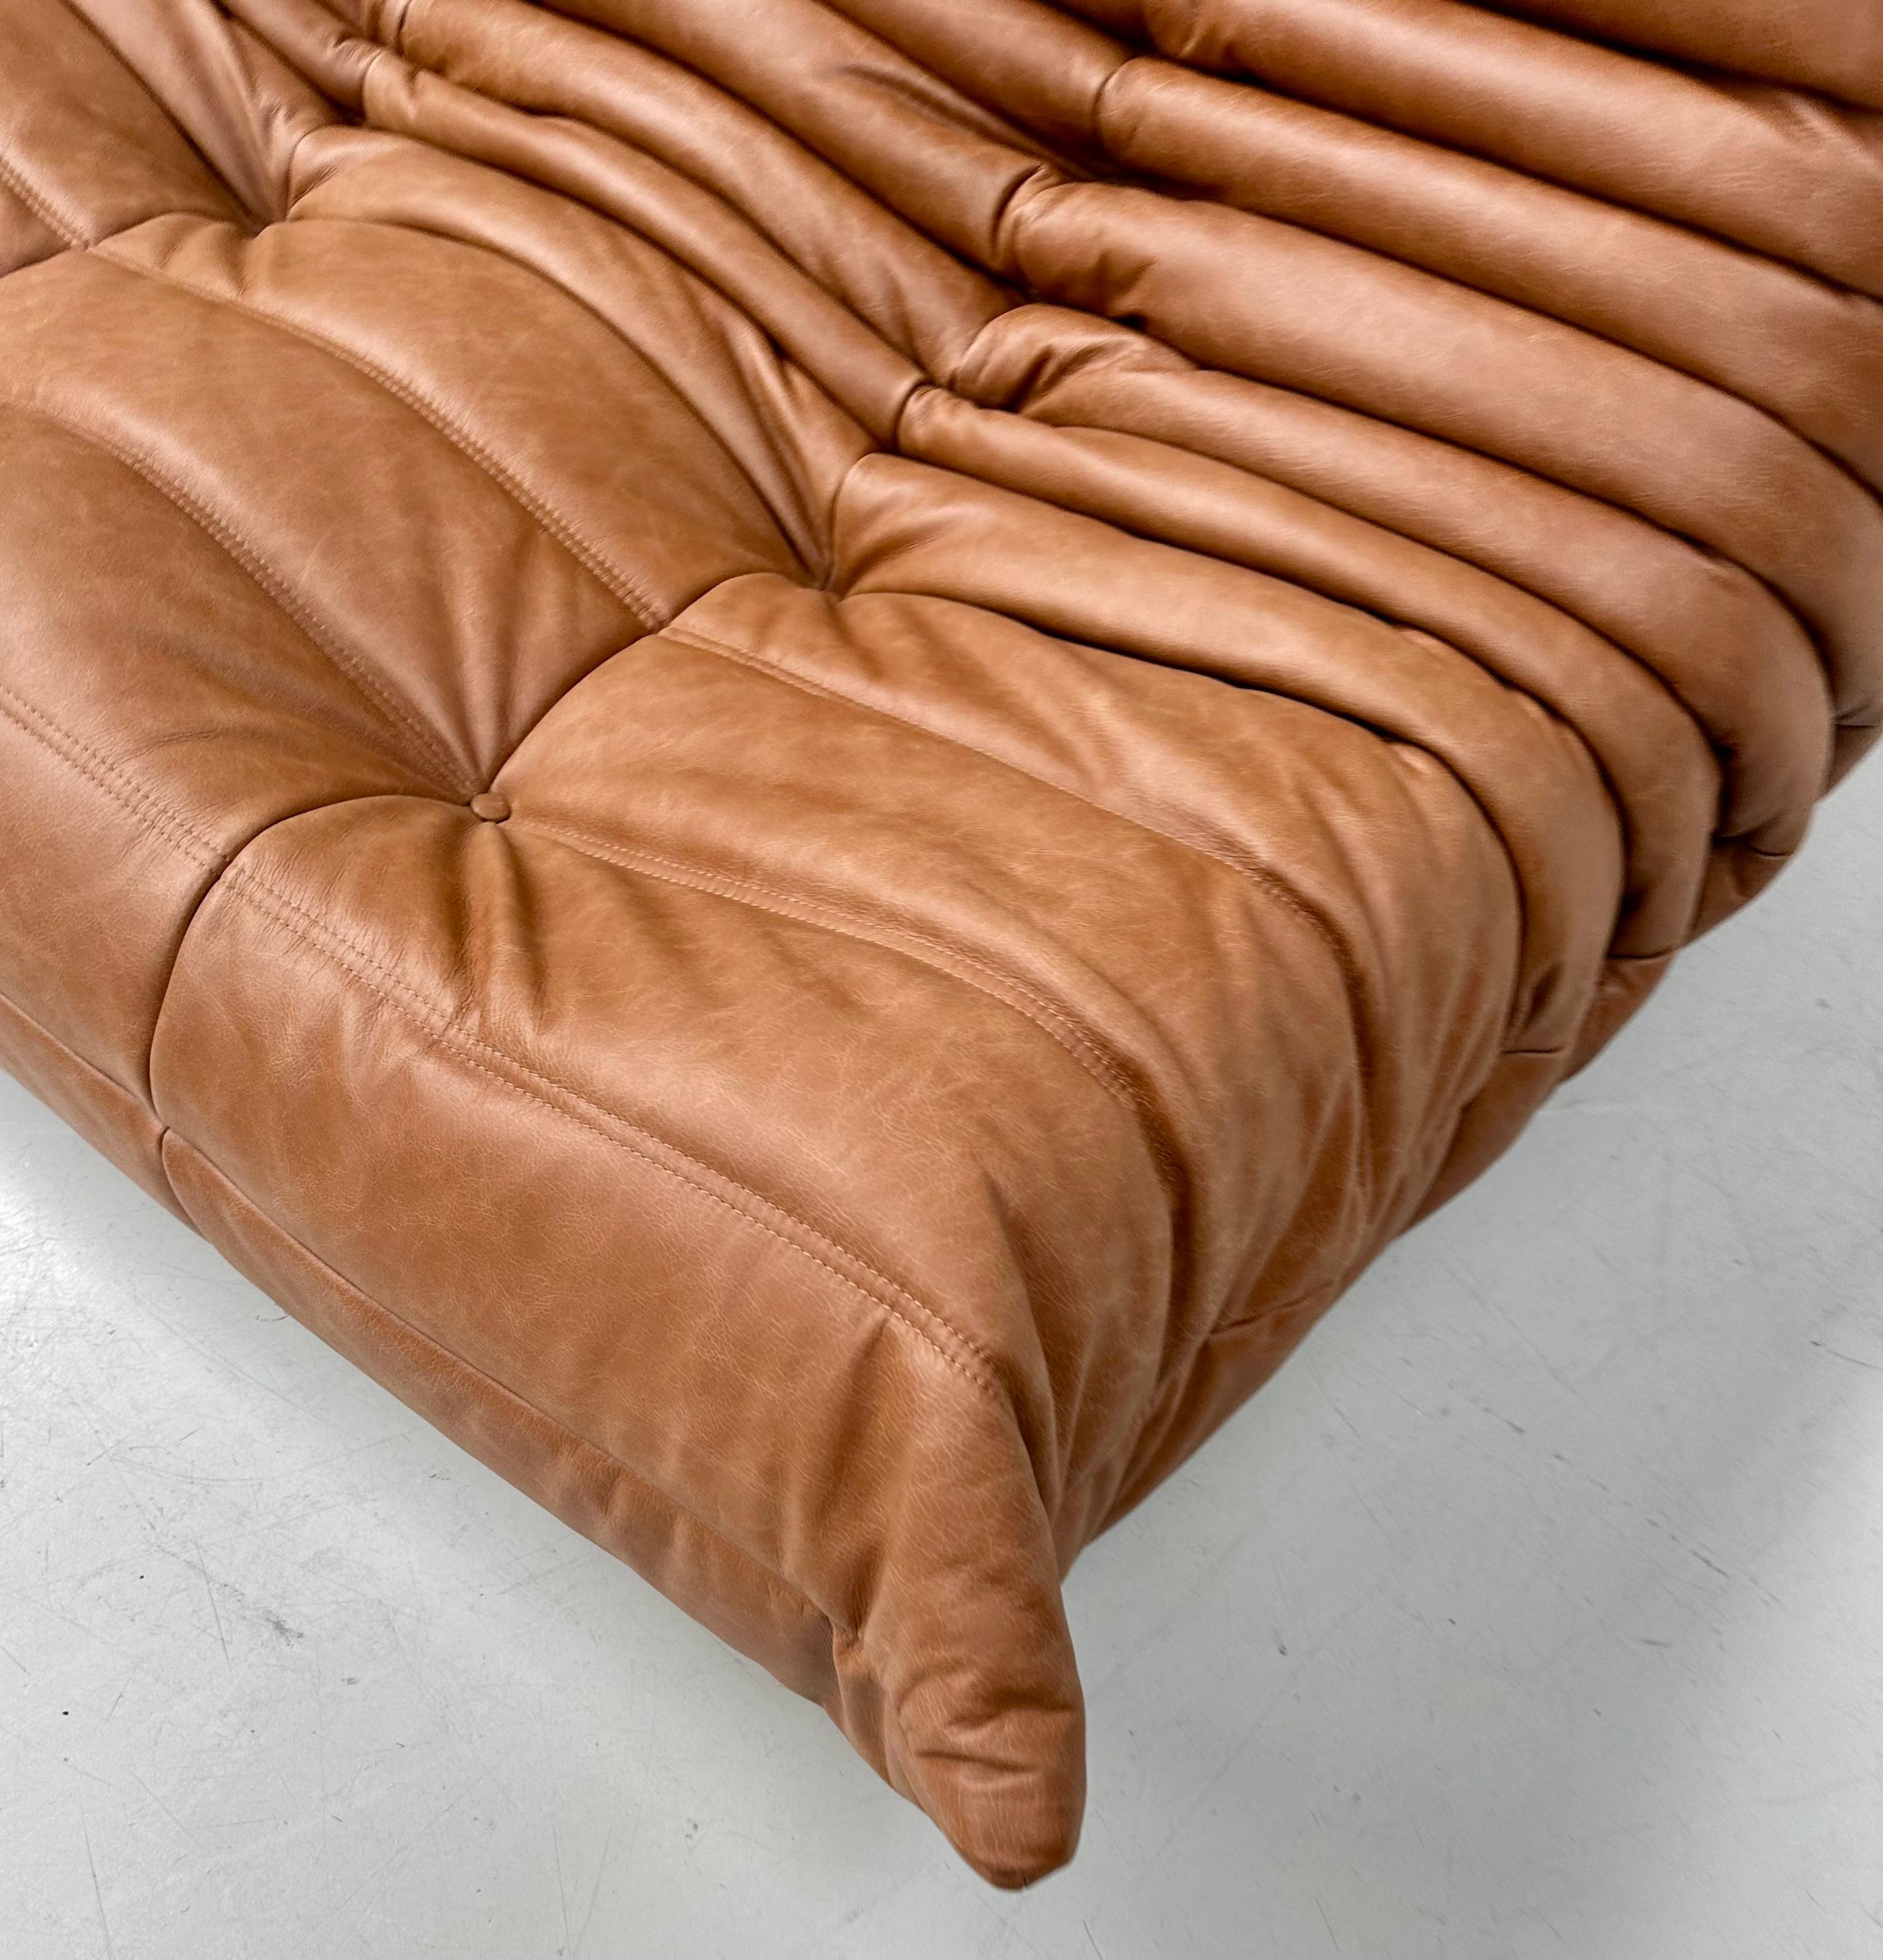 20th Century French Togo Sofa in Cognac  Leather by Michel Ducaroy for Ligne Roset.